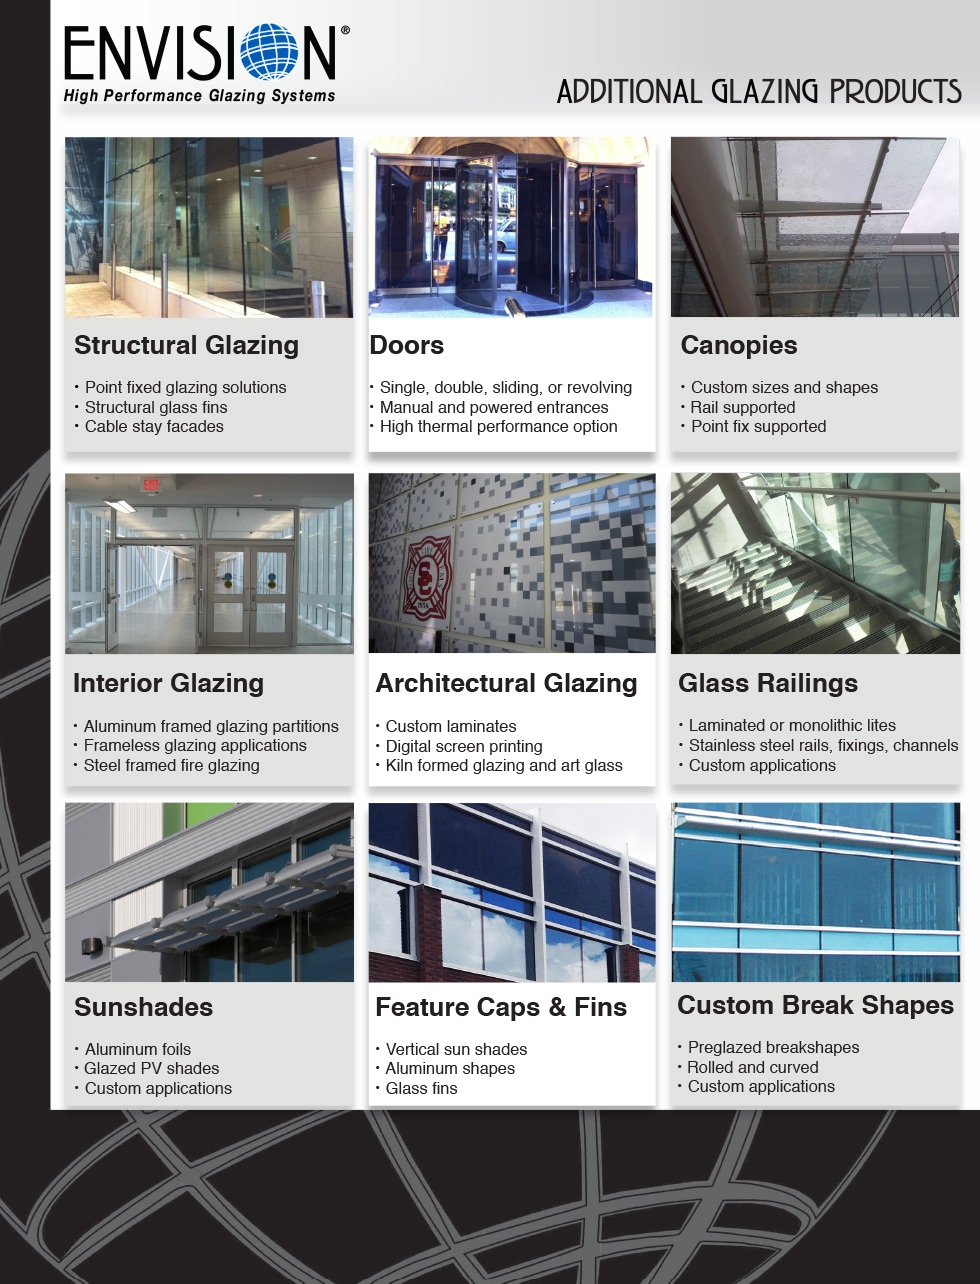 ENVISION - Products - Additional Glazing